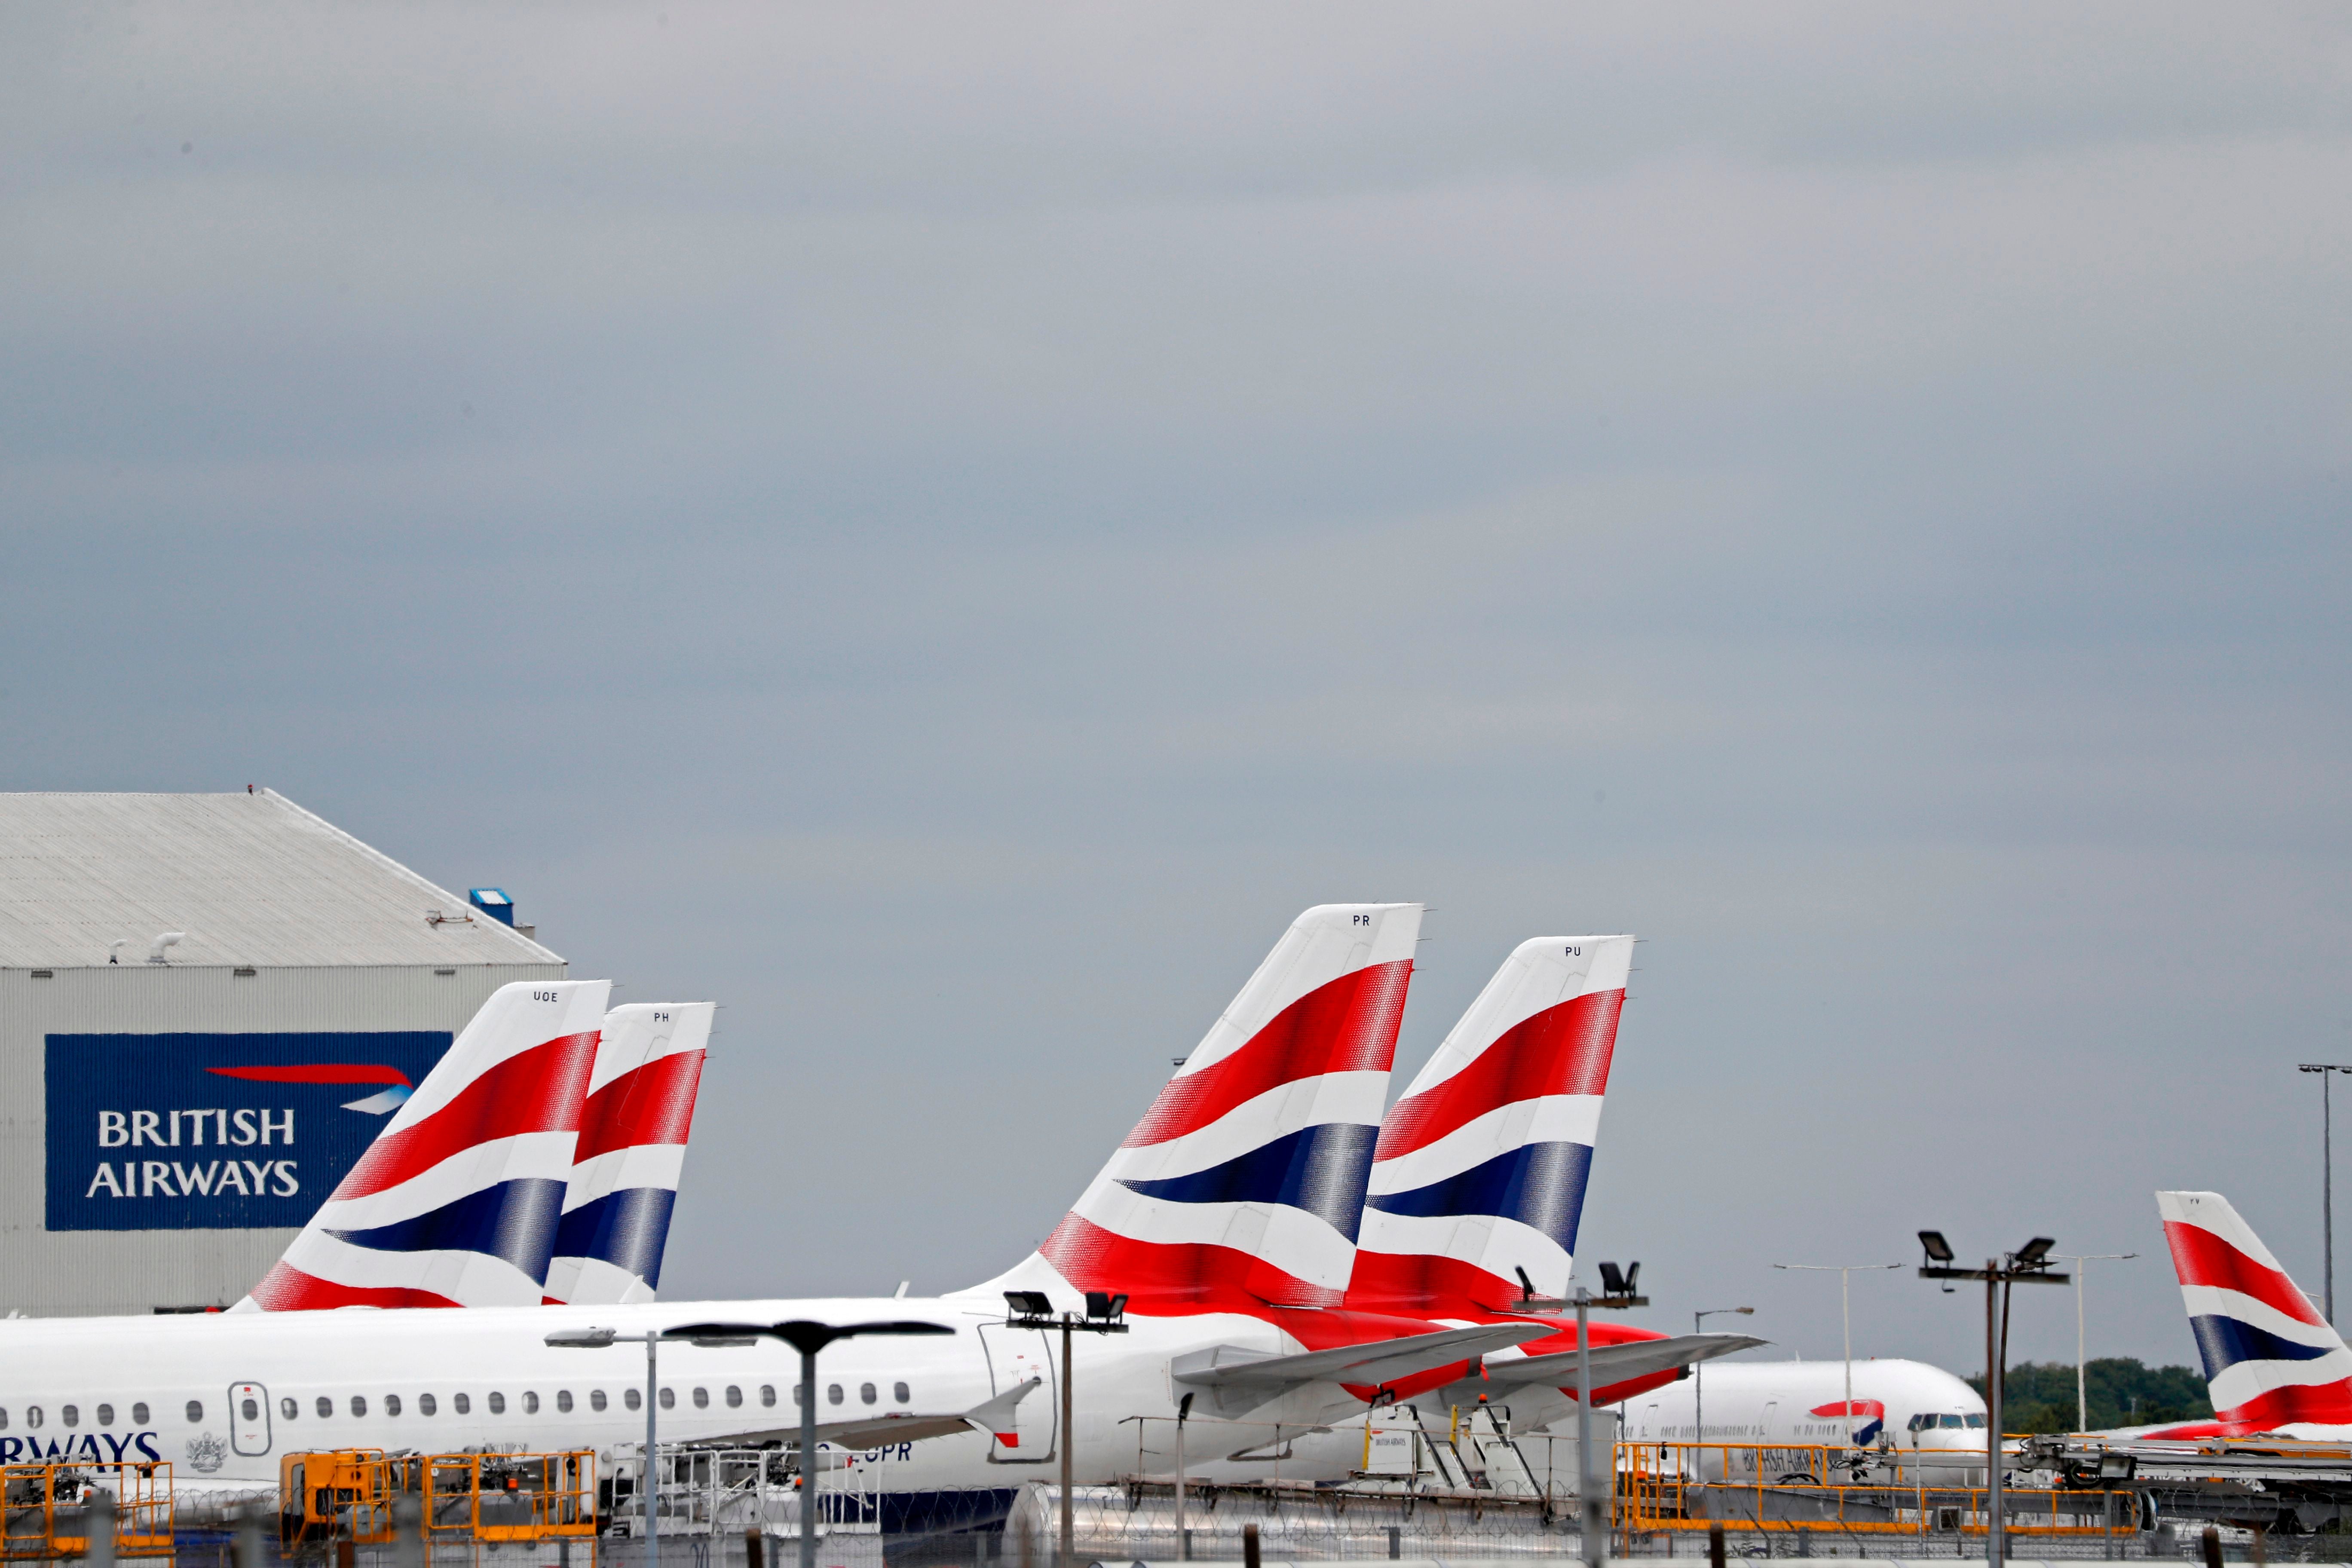 BA Accra flights are currently operated from Heathrow